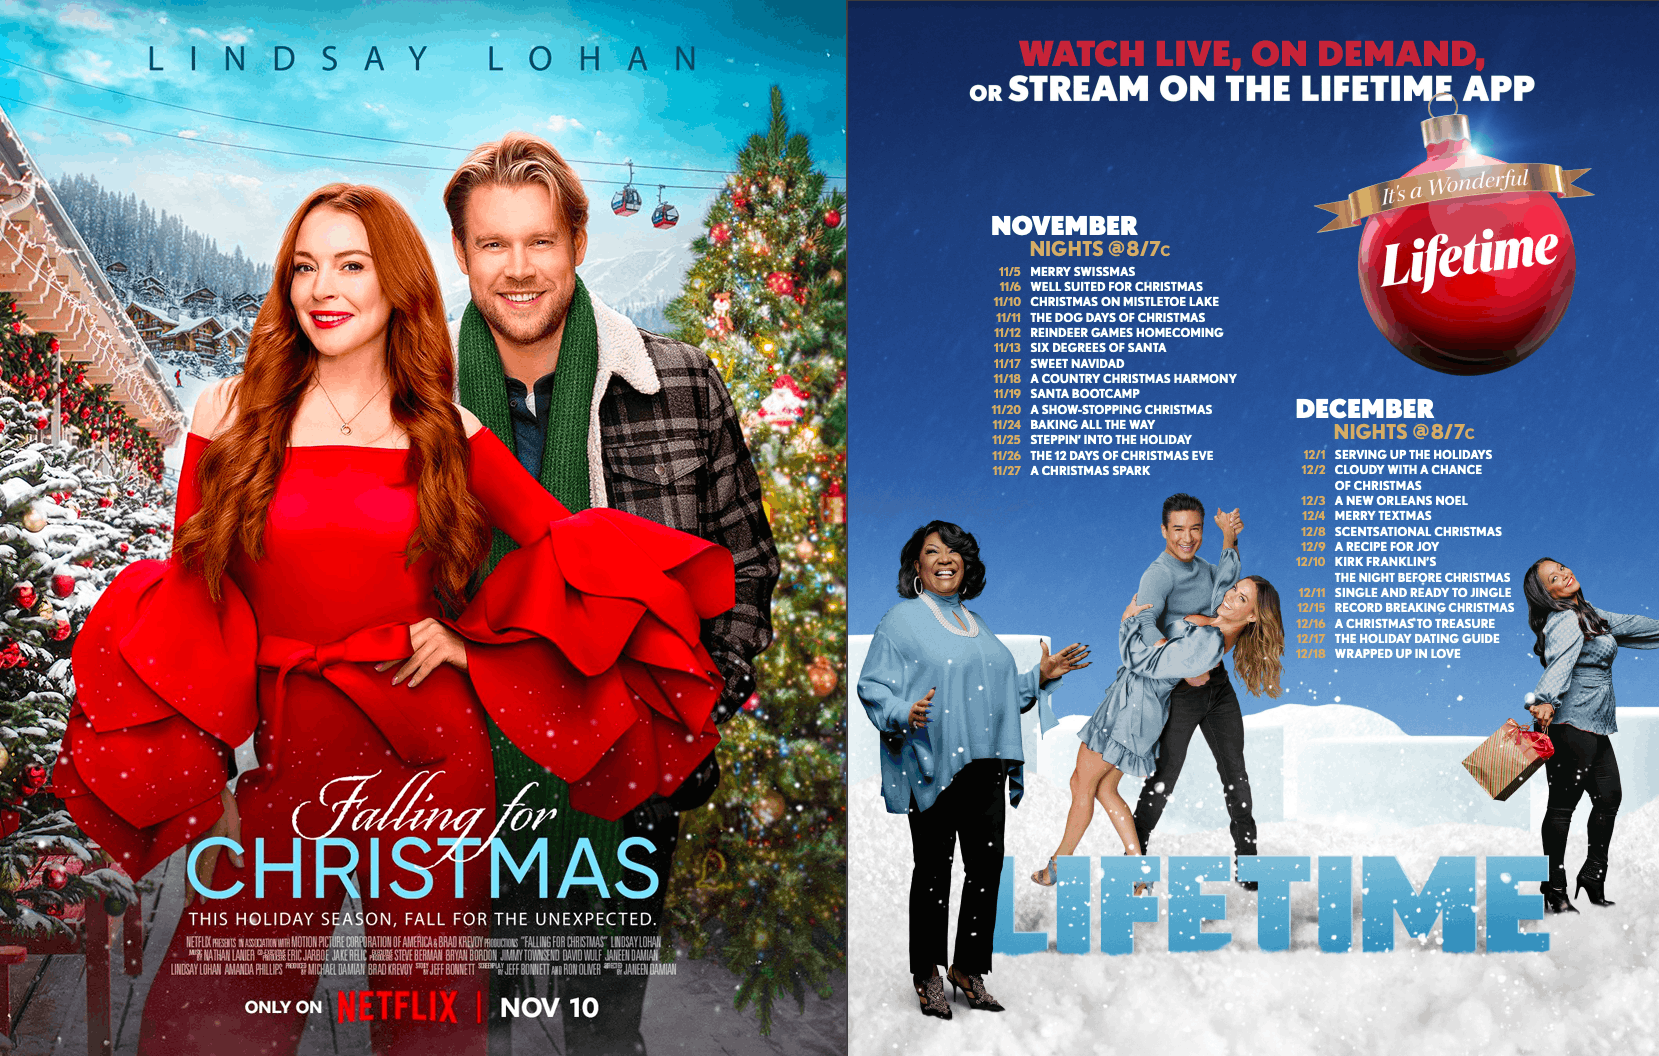 A poster for a netflix christmas movie alongside the Lifetime holiday movie schedule